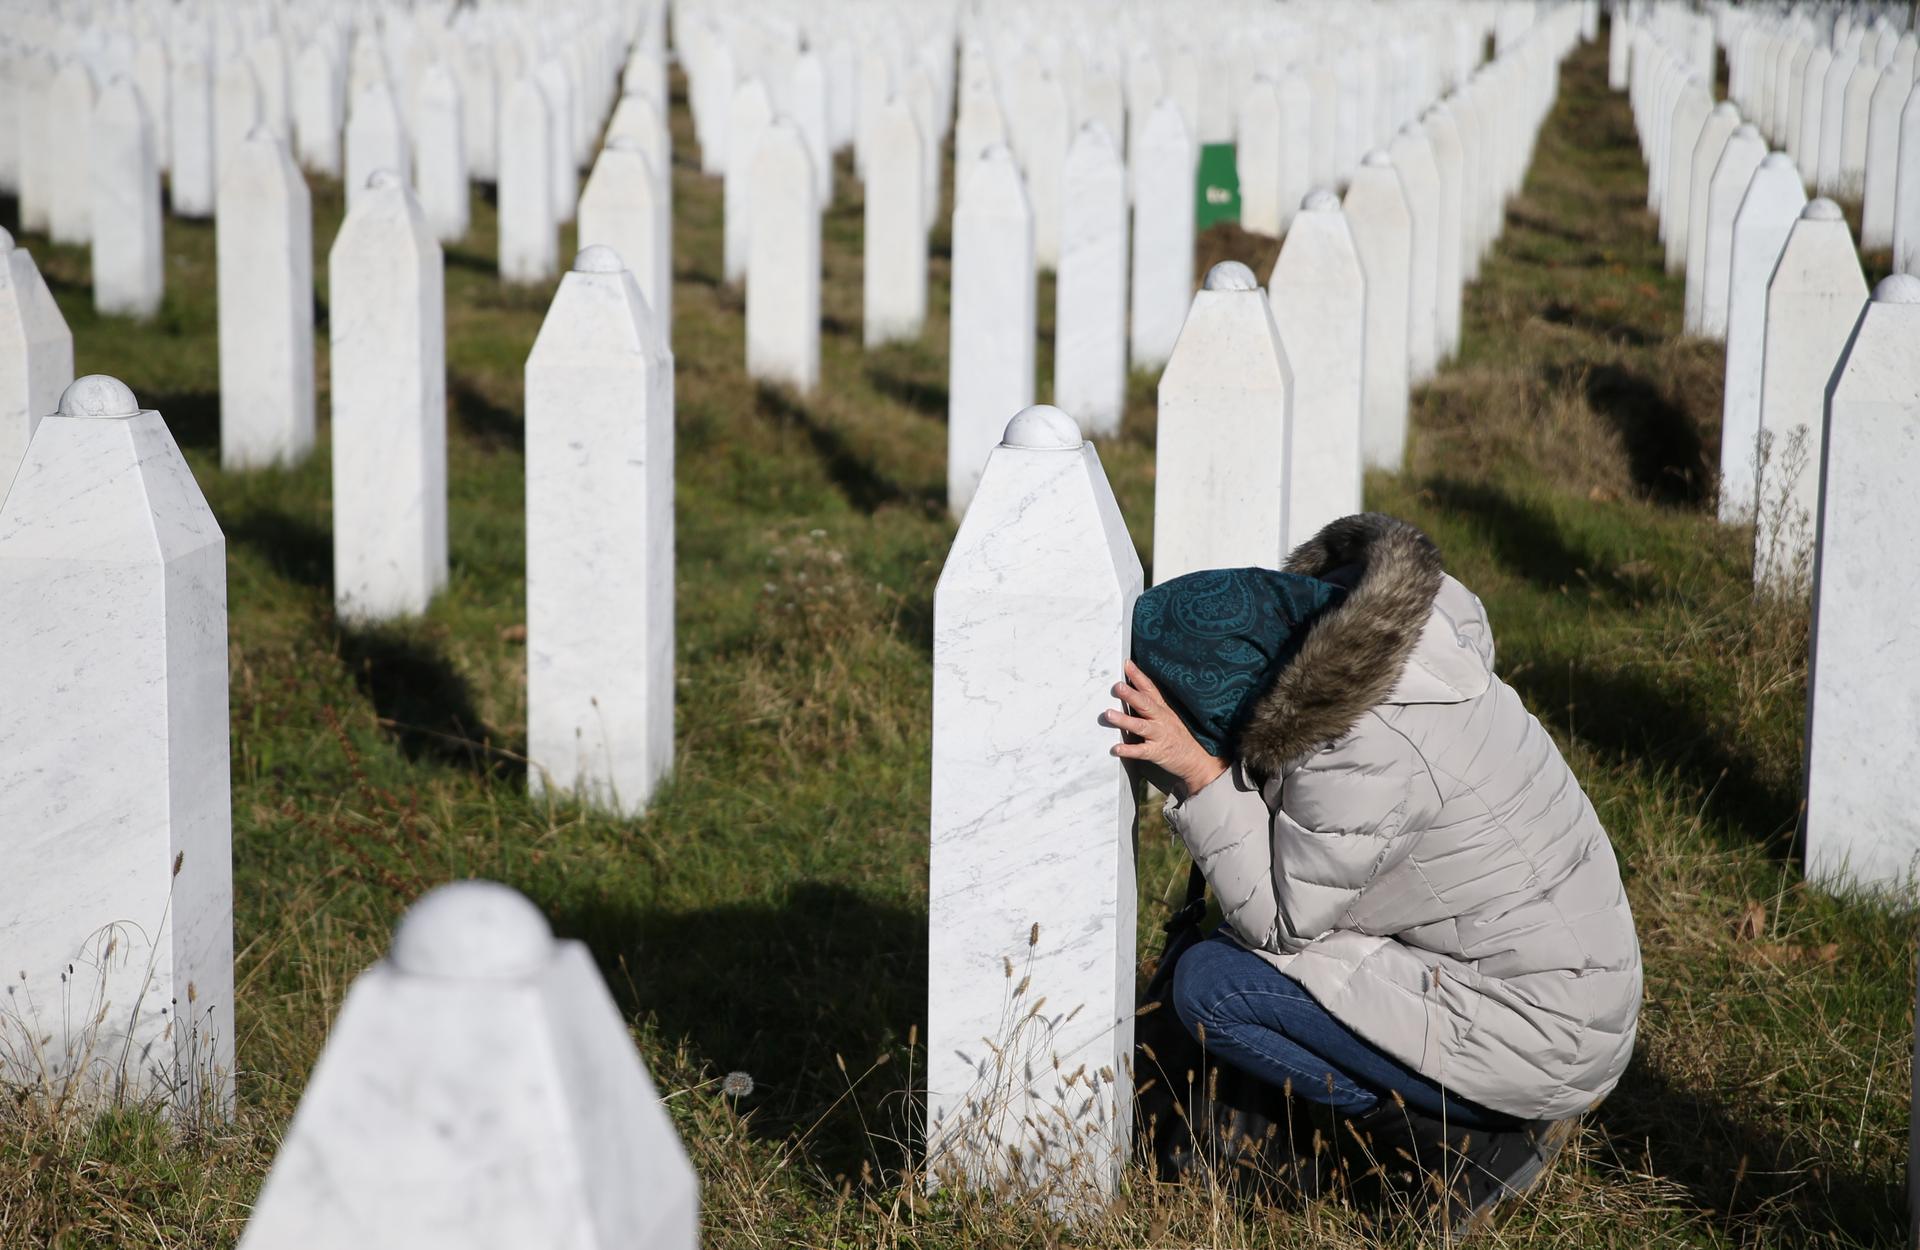 A women kneels with her head down next to a grave marker near Srebrenica.